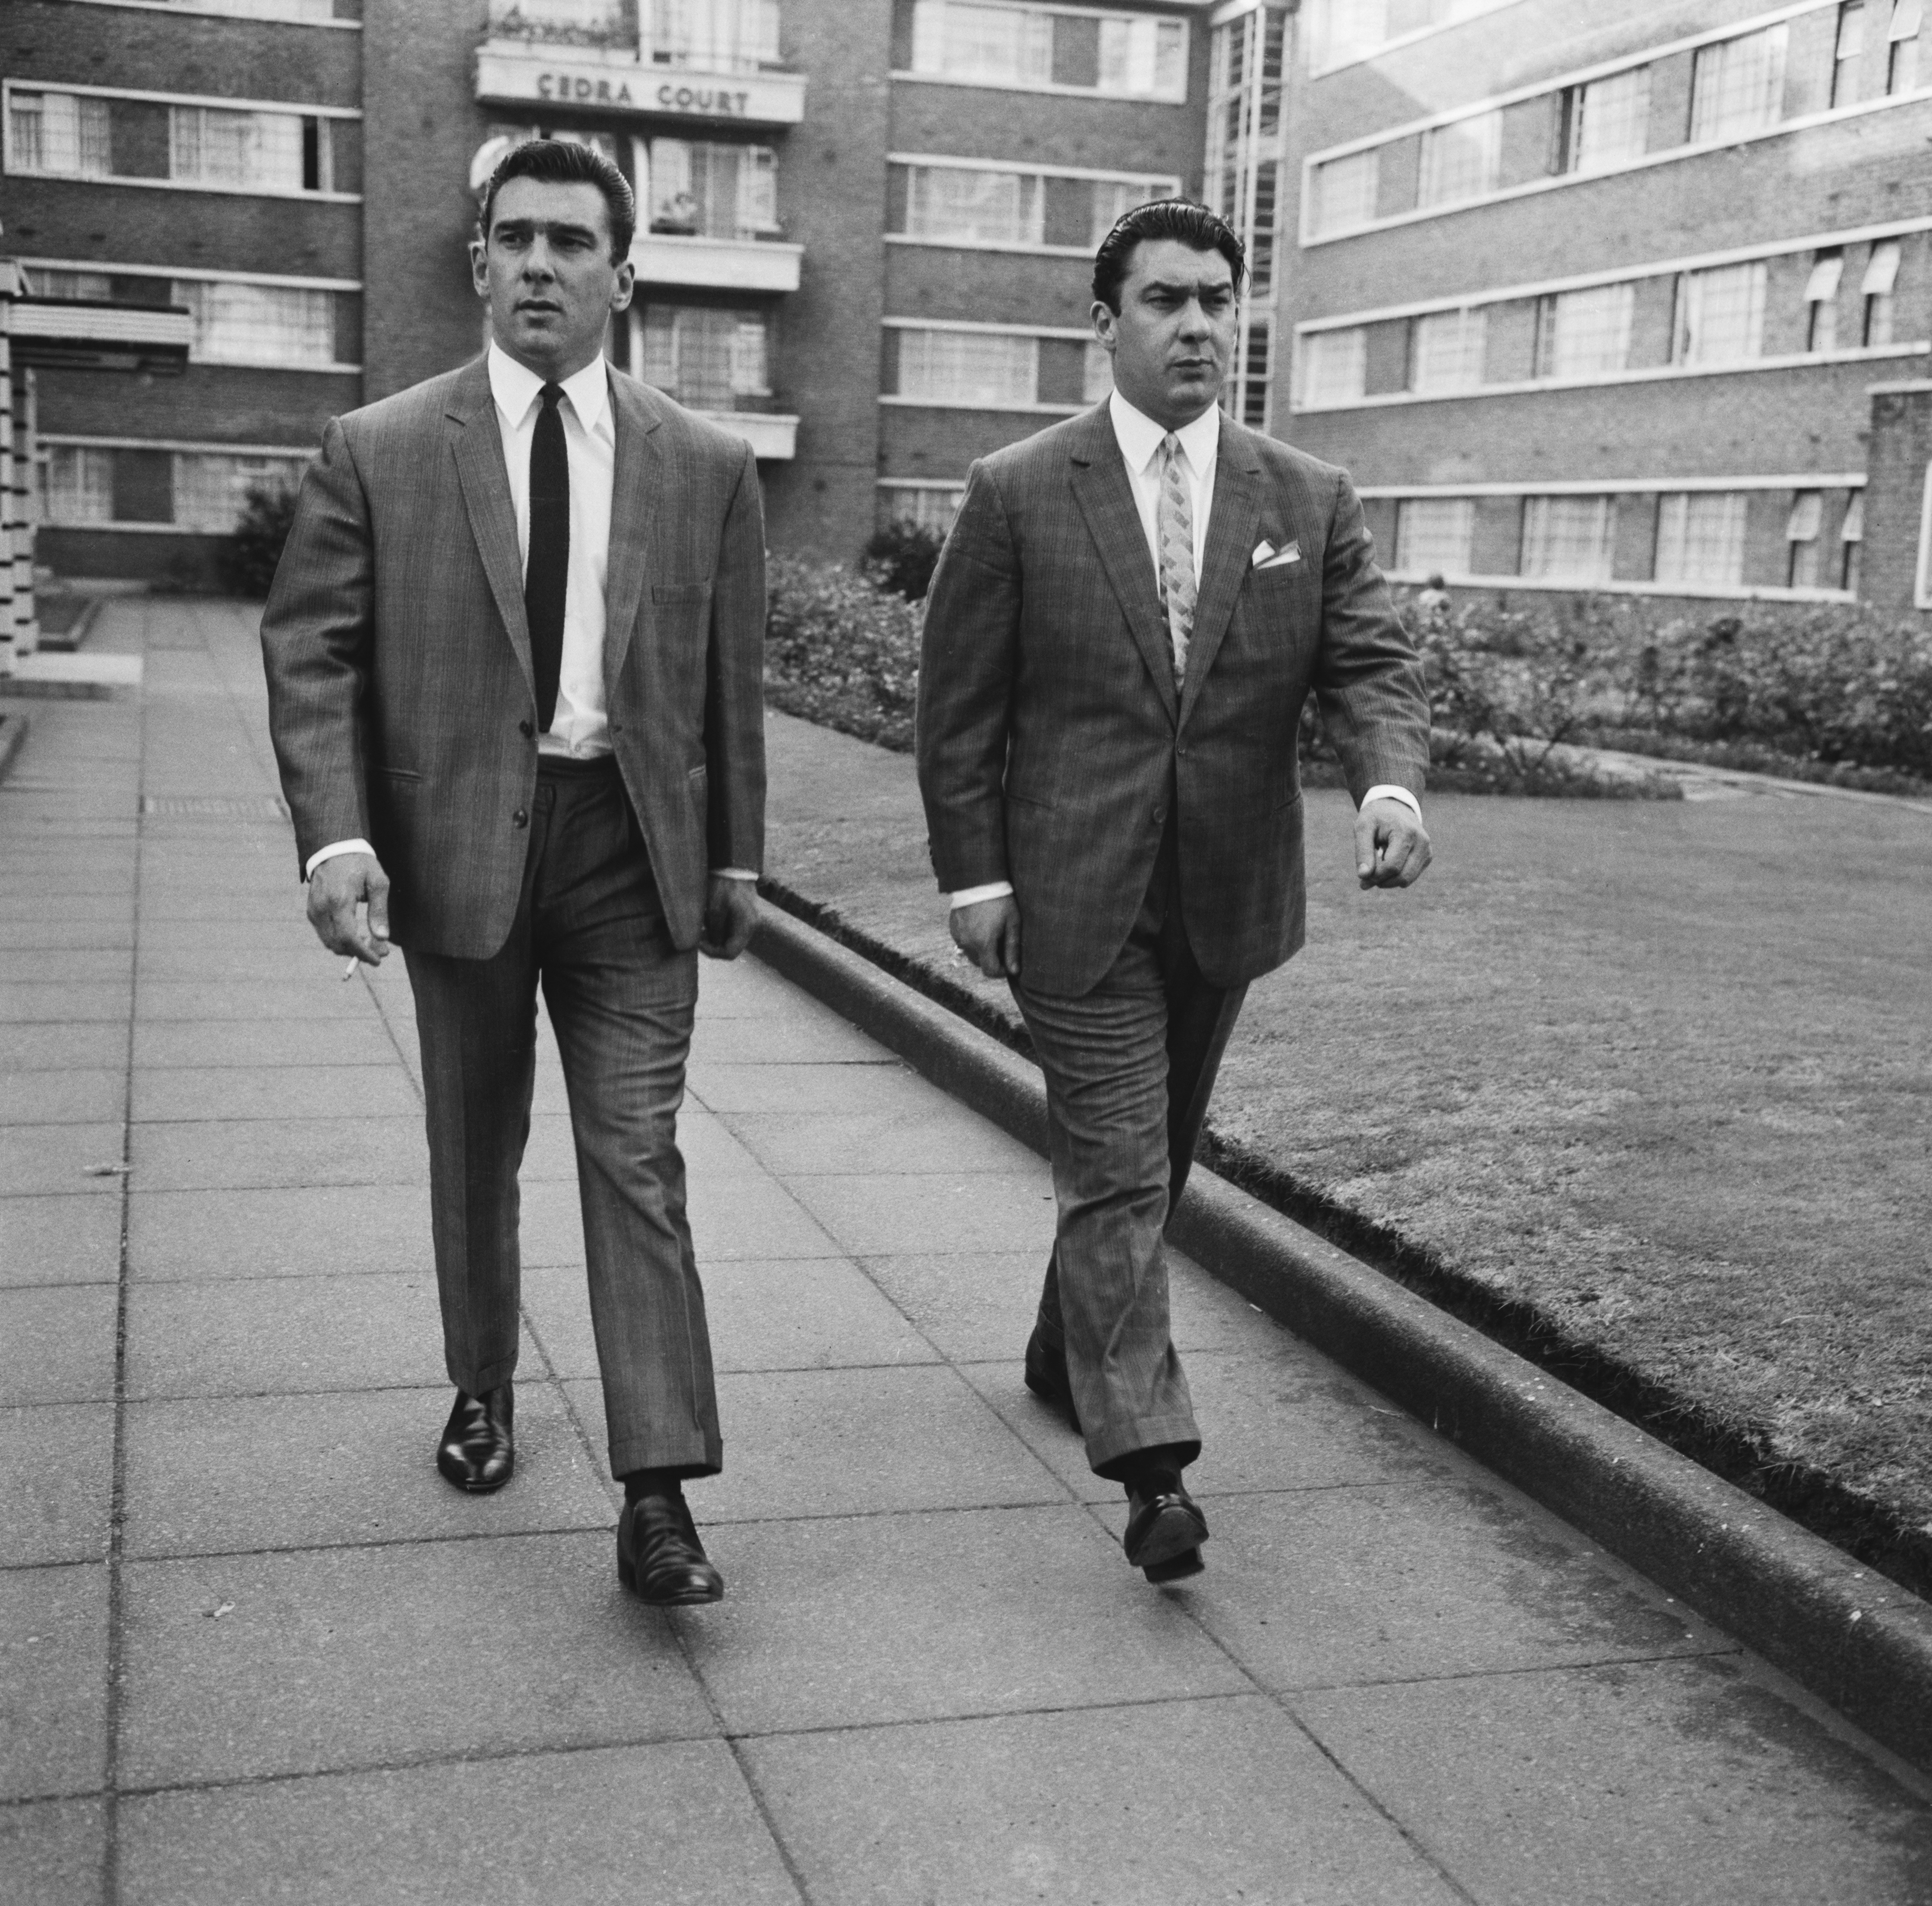 Feared gangsters Ronnie and Reggie Kray in London in 1964 qhiqqhiqhuiqudinv